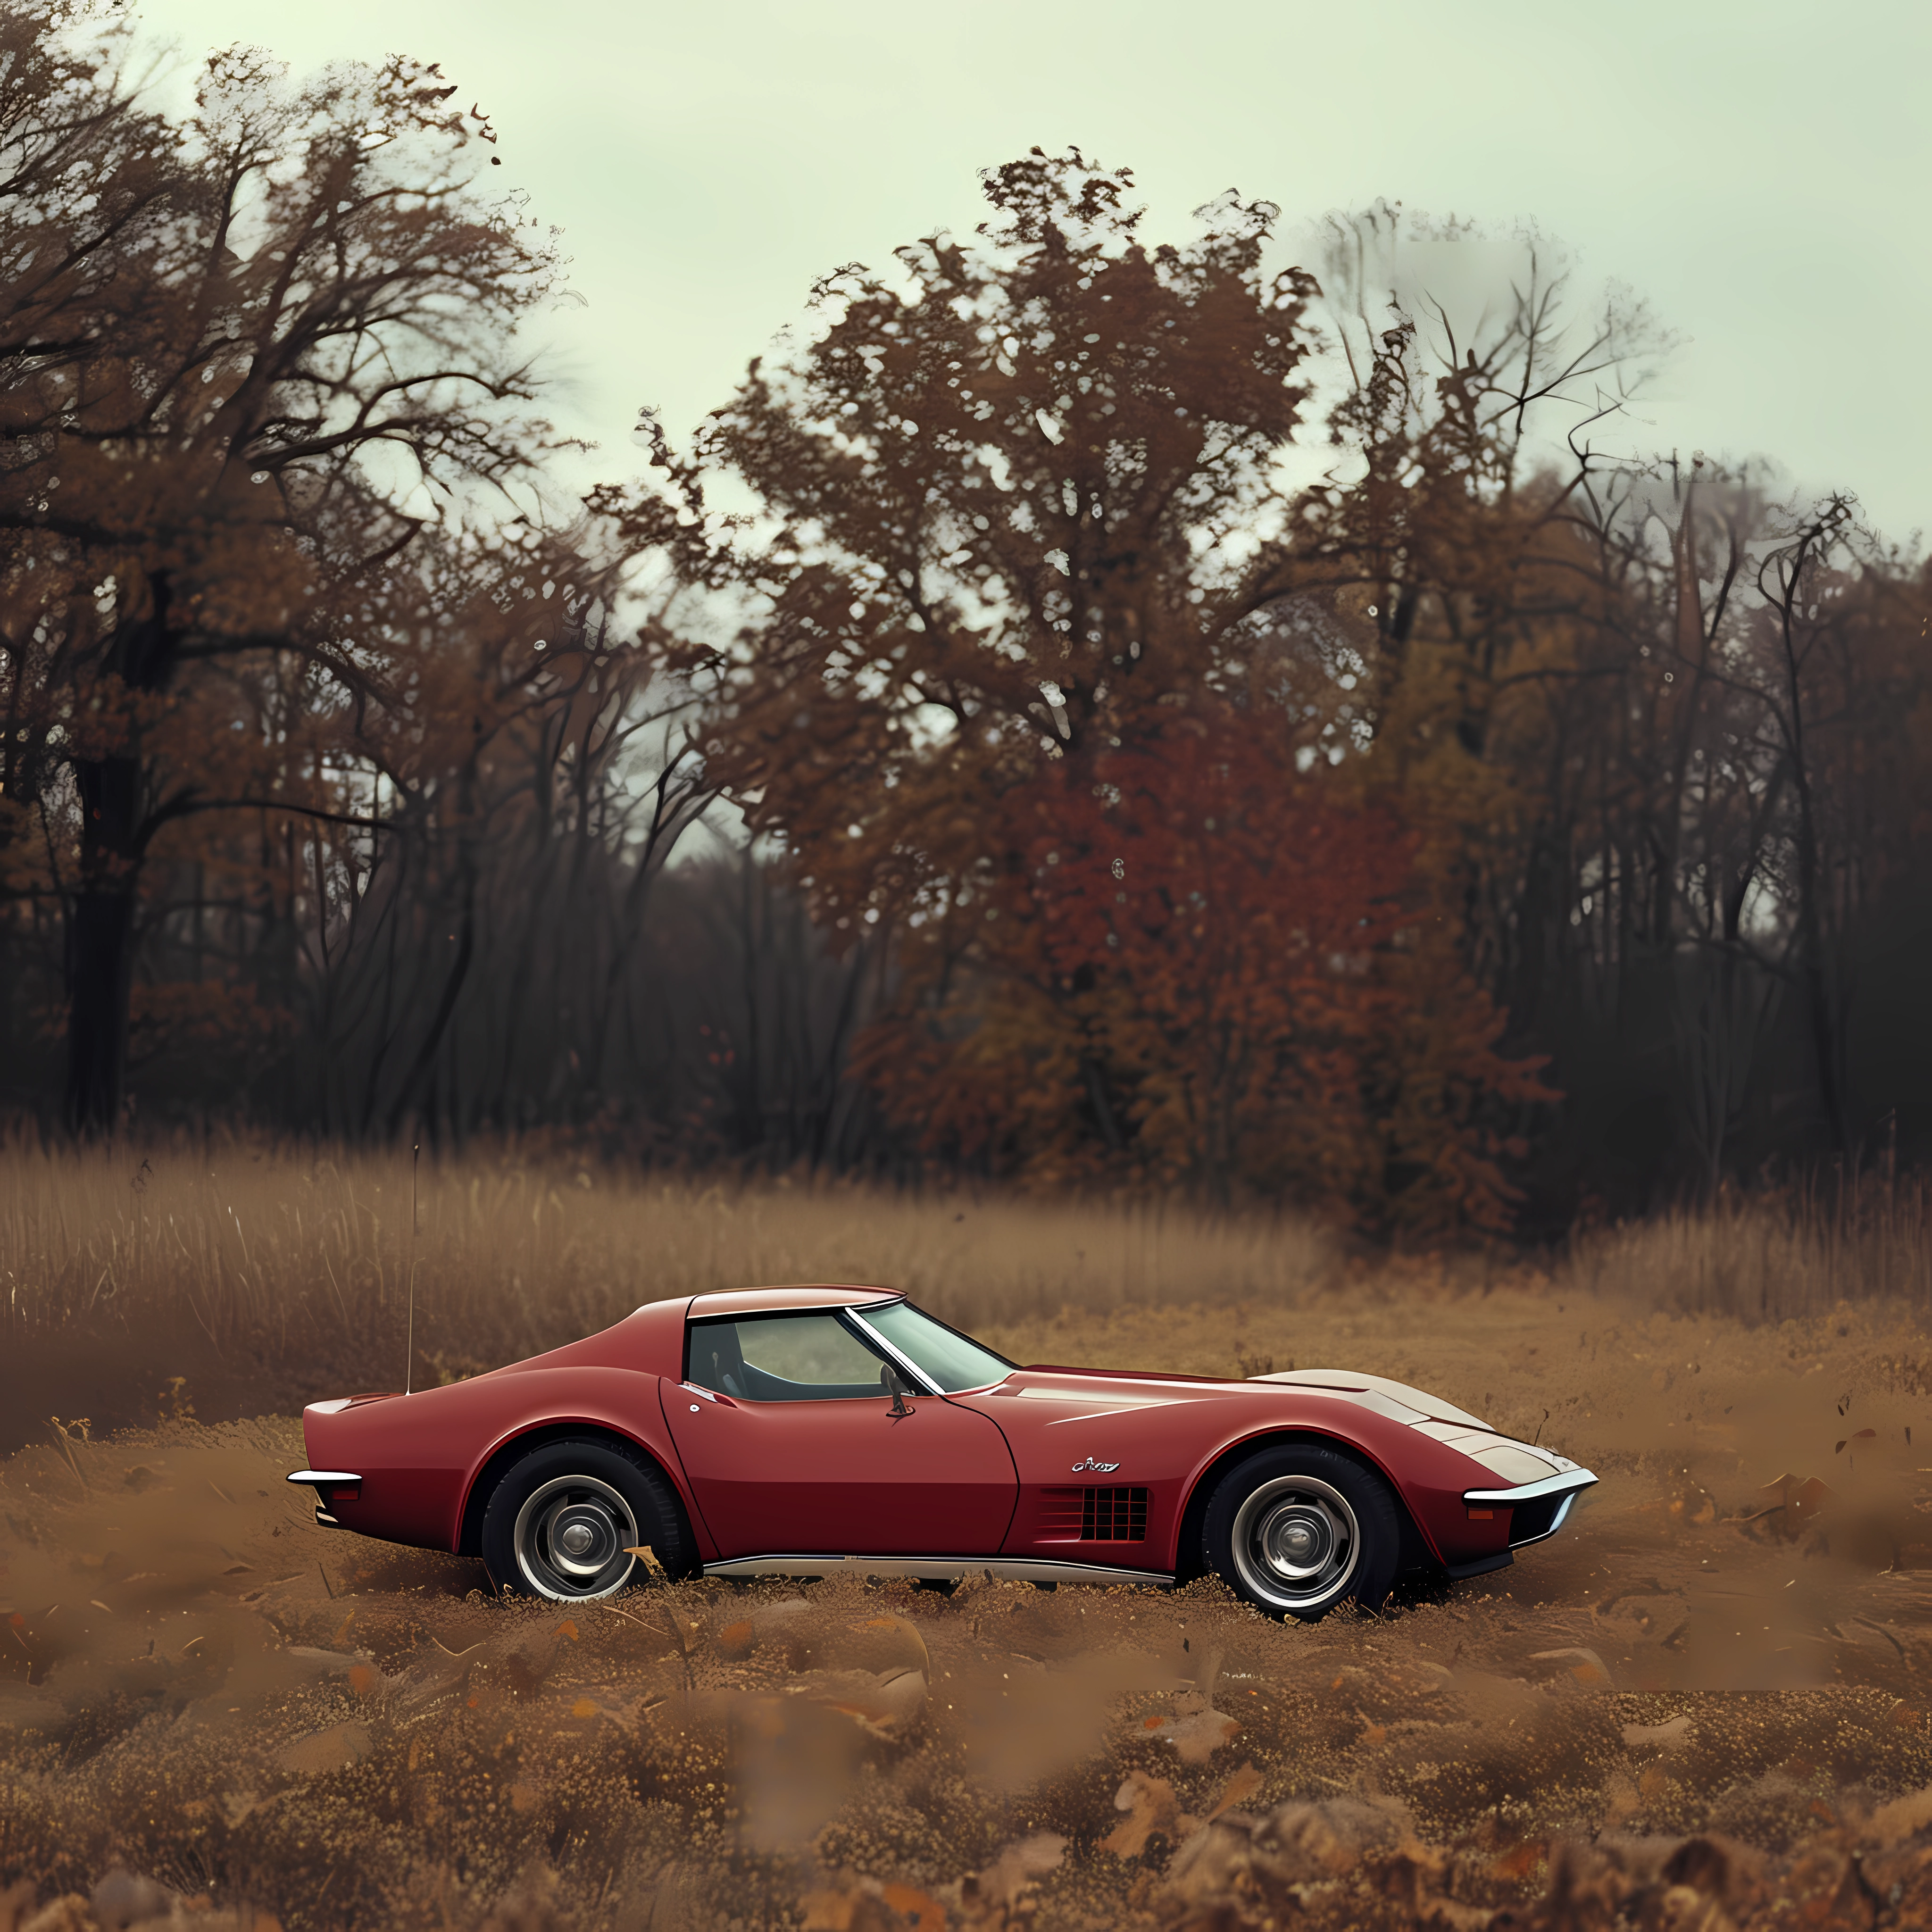 Red Chevrolet Corvette Stingray parked in autumn scenery, perfect for a classic car enthusiast's avatar or profile picture.